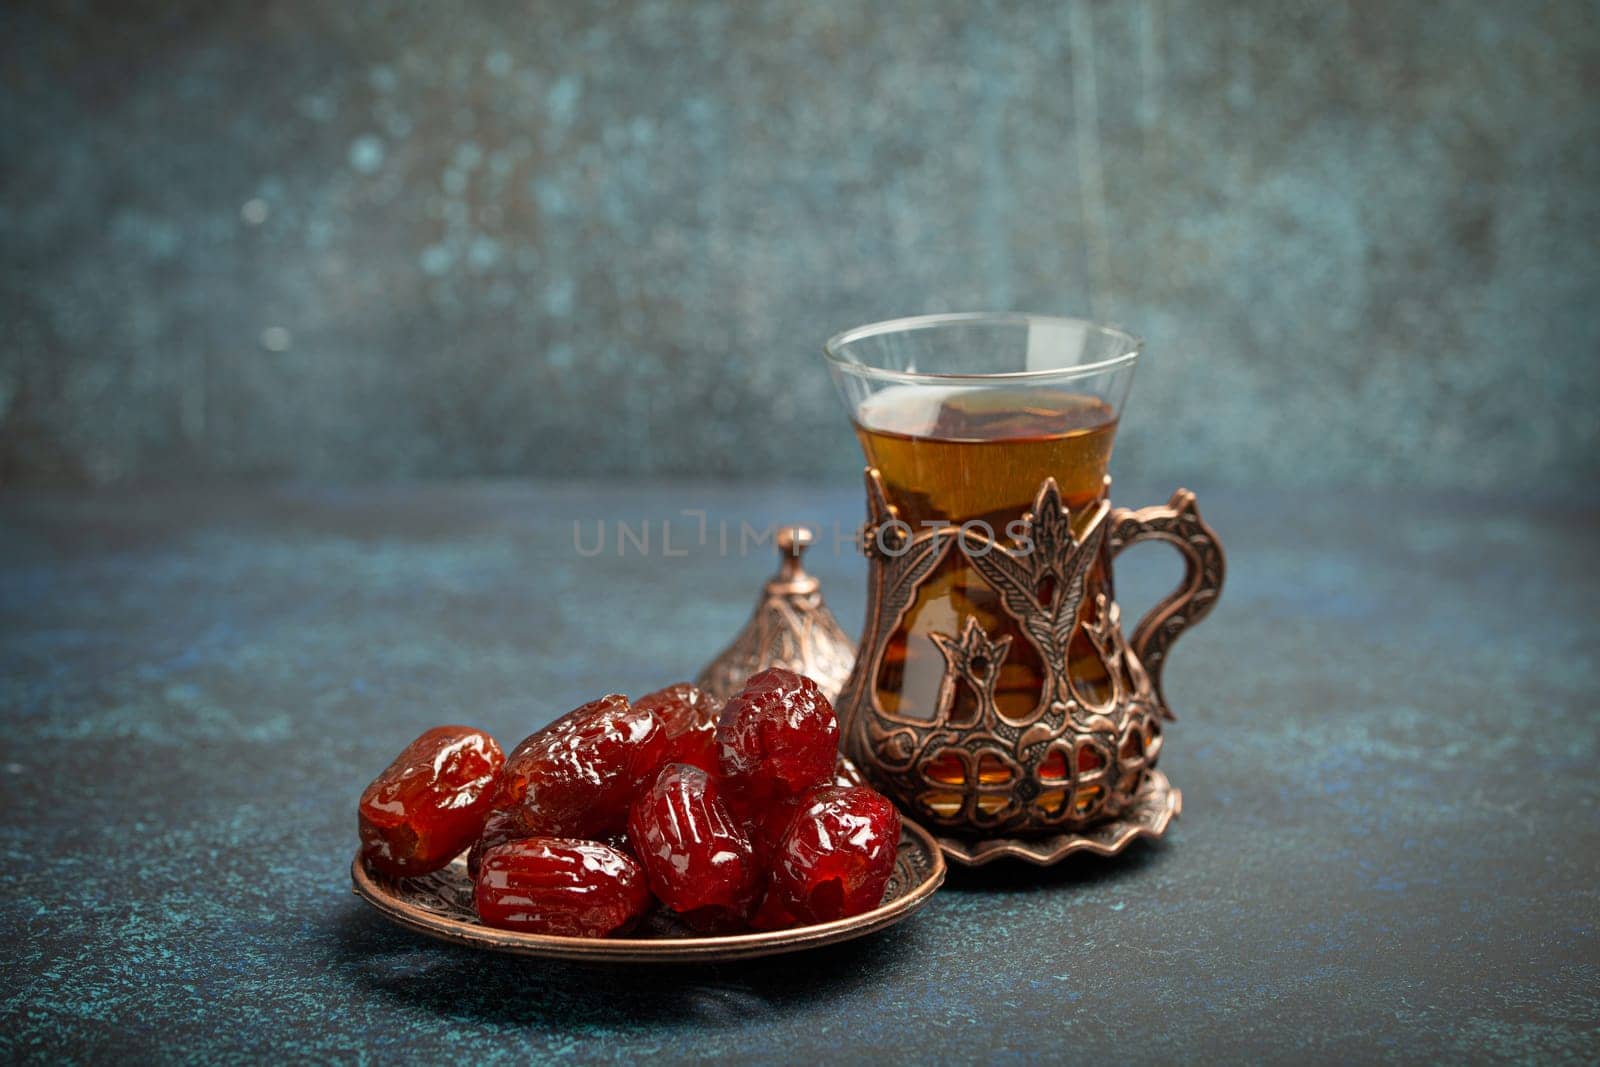 Breaking fasting with dried dates during Ramadan Kareem, Iftar meal with dates and Arab tea in traditional glass, angle view on rustic blue background. Muslim feast by its_al_dente